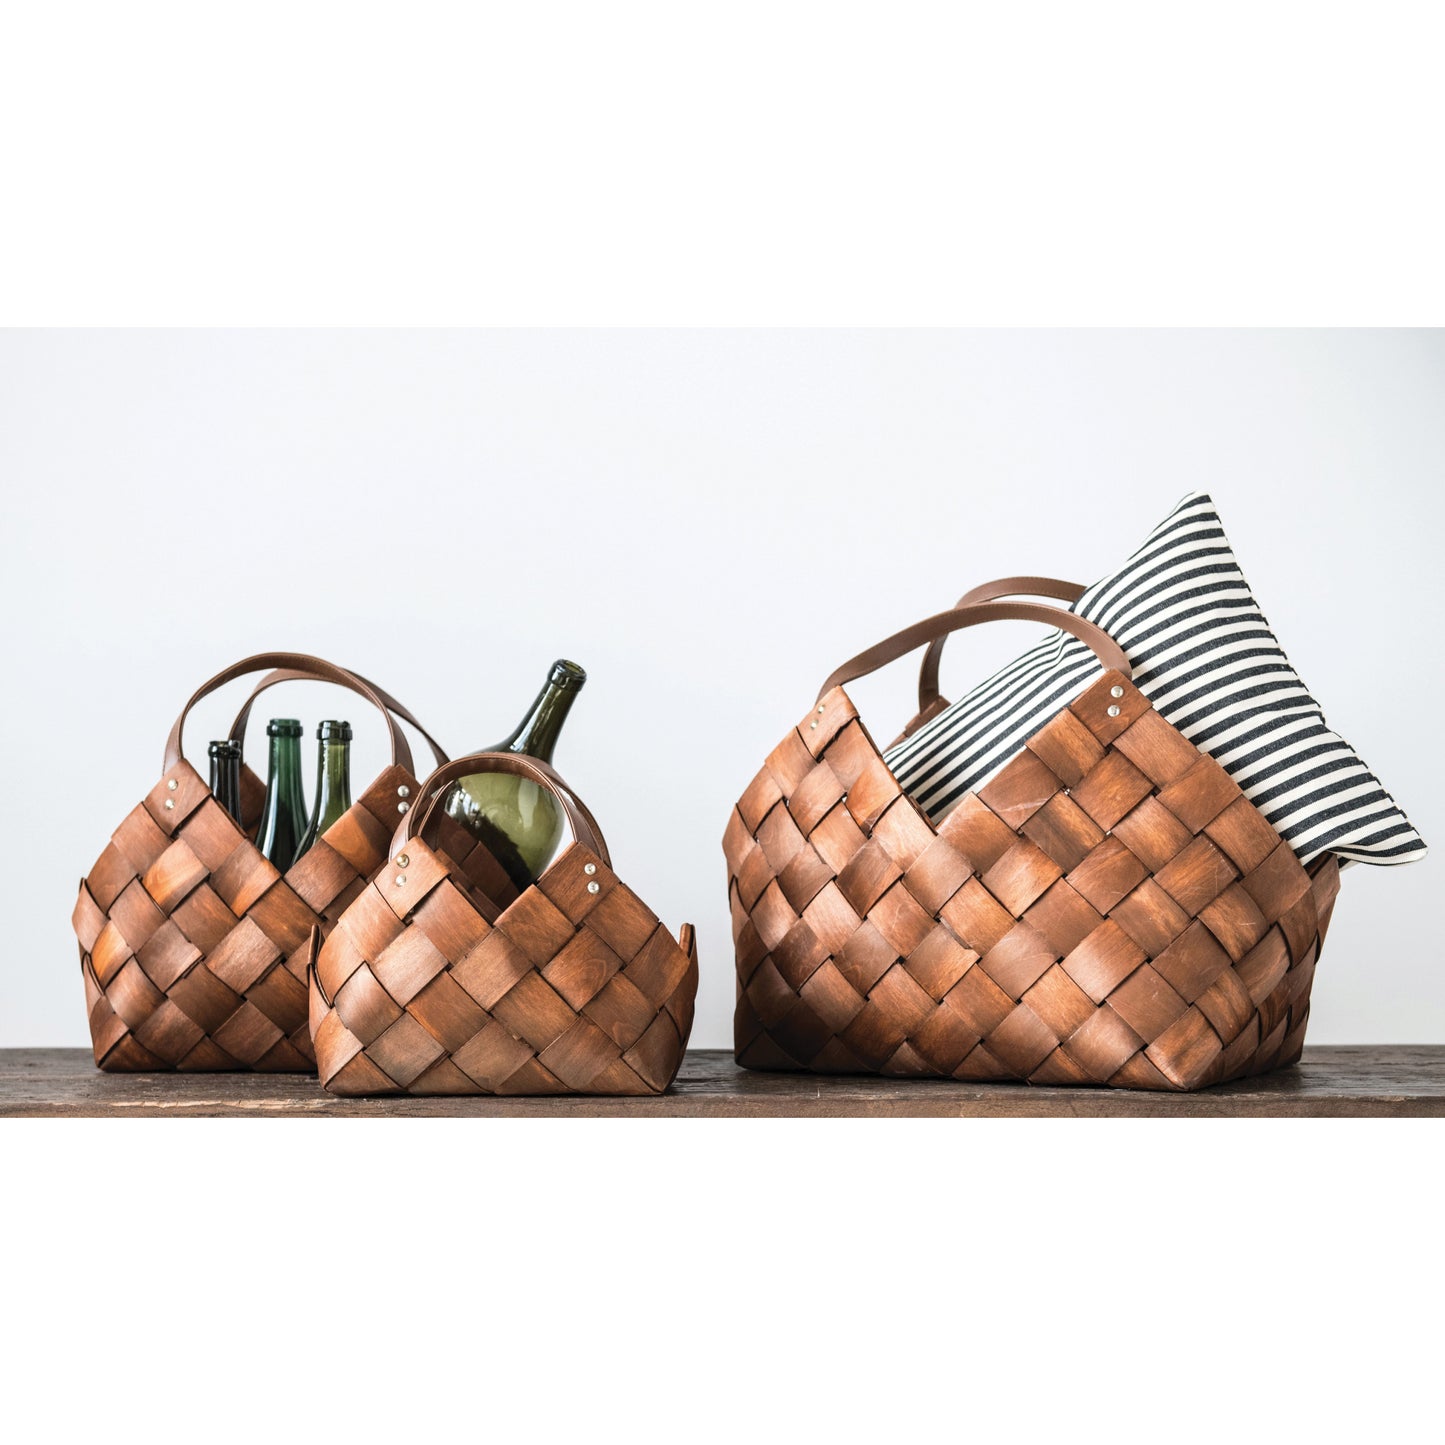 Woven Baskets with Handles - 3 Sizes